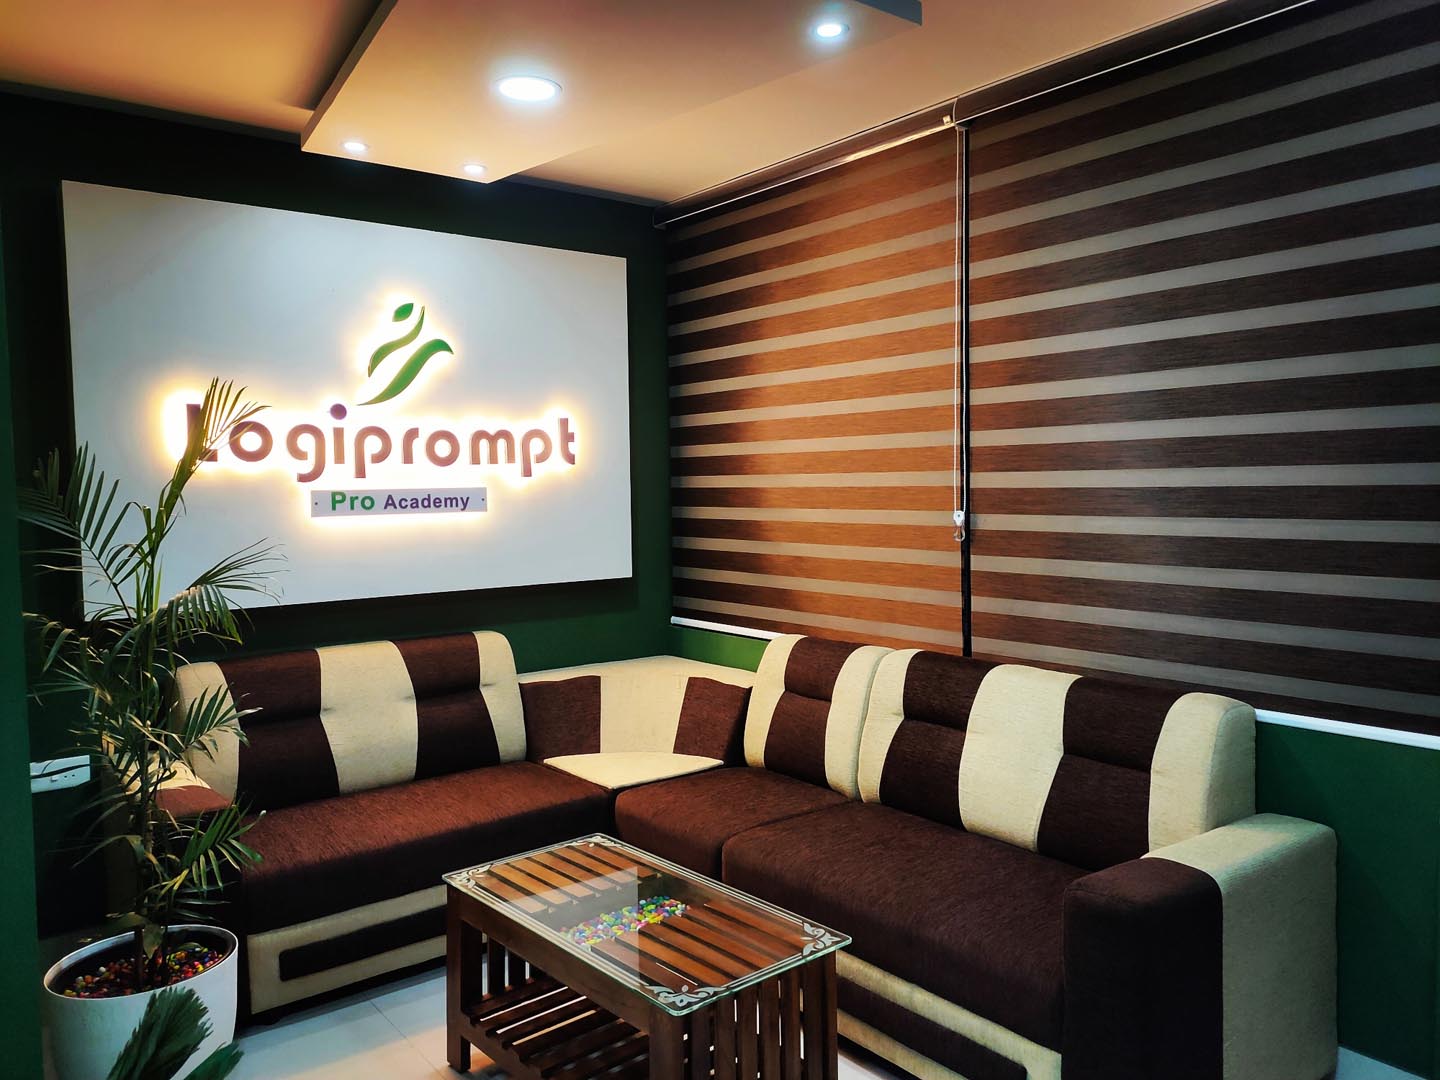 Logiprompt Pro Academy Office Image 01